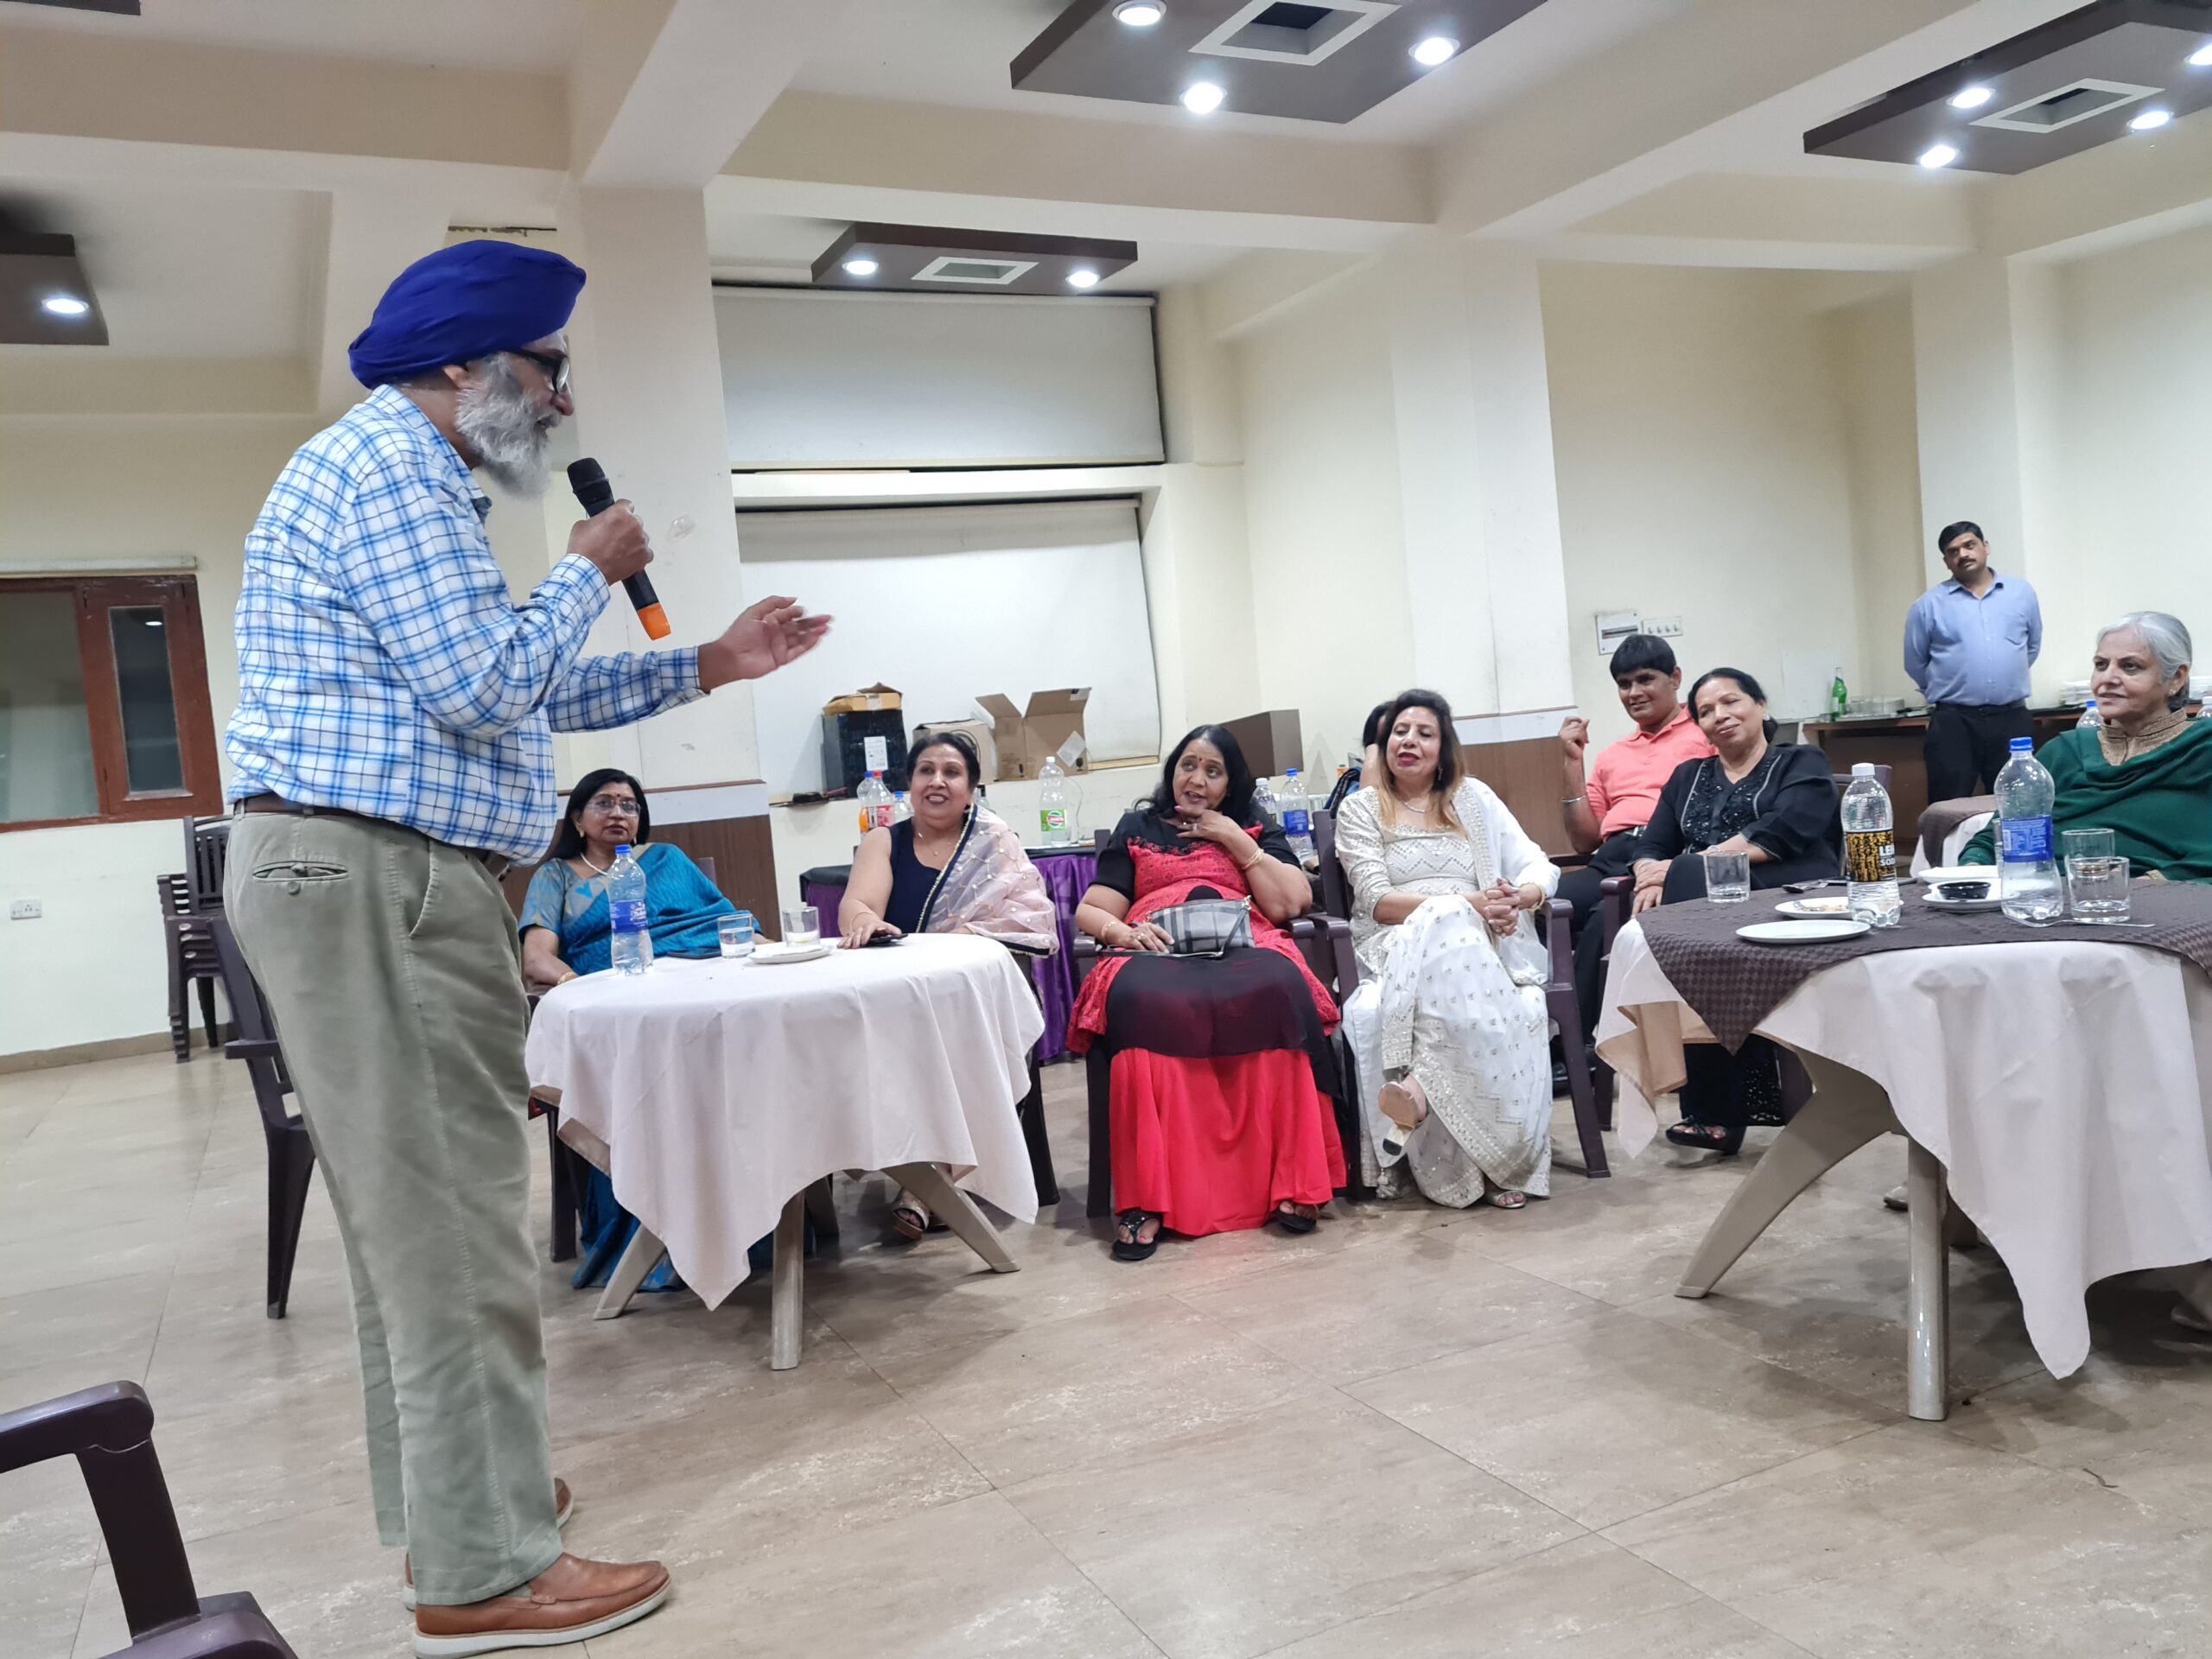 DOSTON KI MEHFIL (DKM) – SECOND EDITION AT SHARANJIT’S HOUSE IN GREATER NOIDA